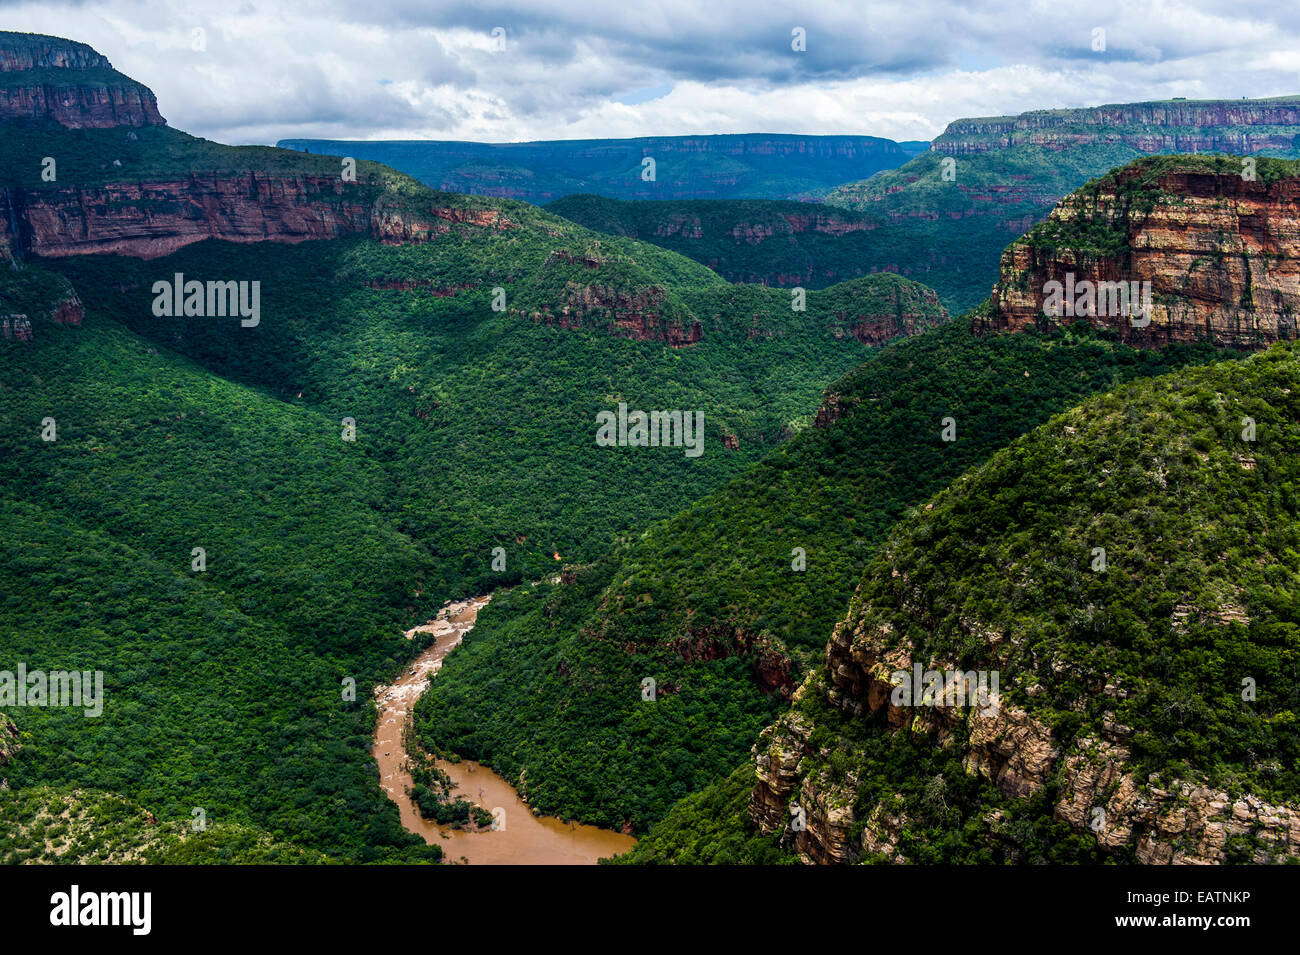 A river carves its way through a gorge shrouded in primeval forest. Stock Photo